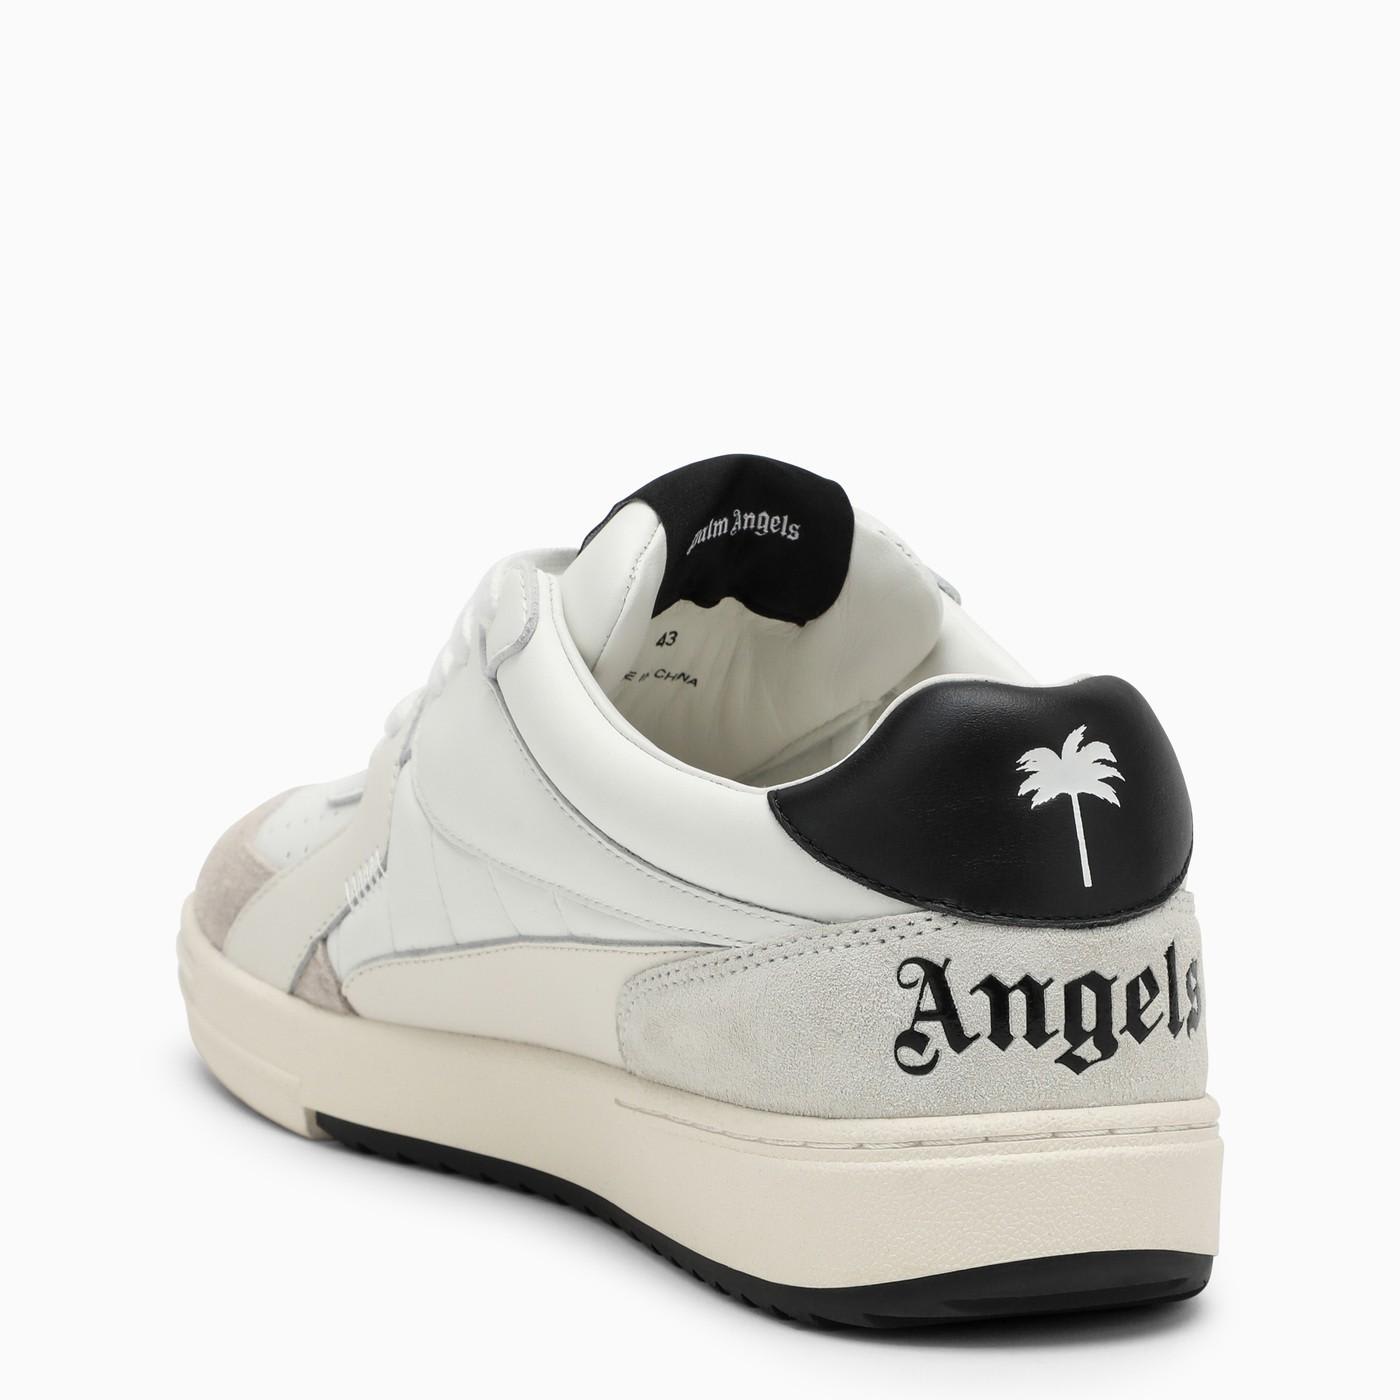 Shop Palm Angels White Leather Trainer